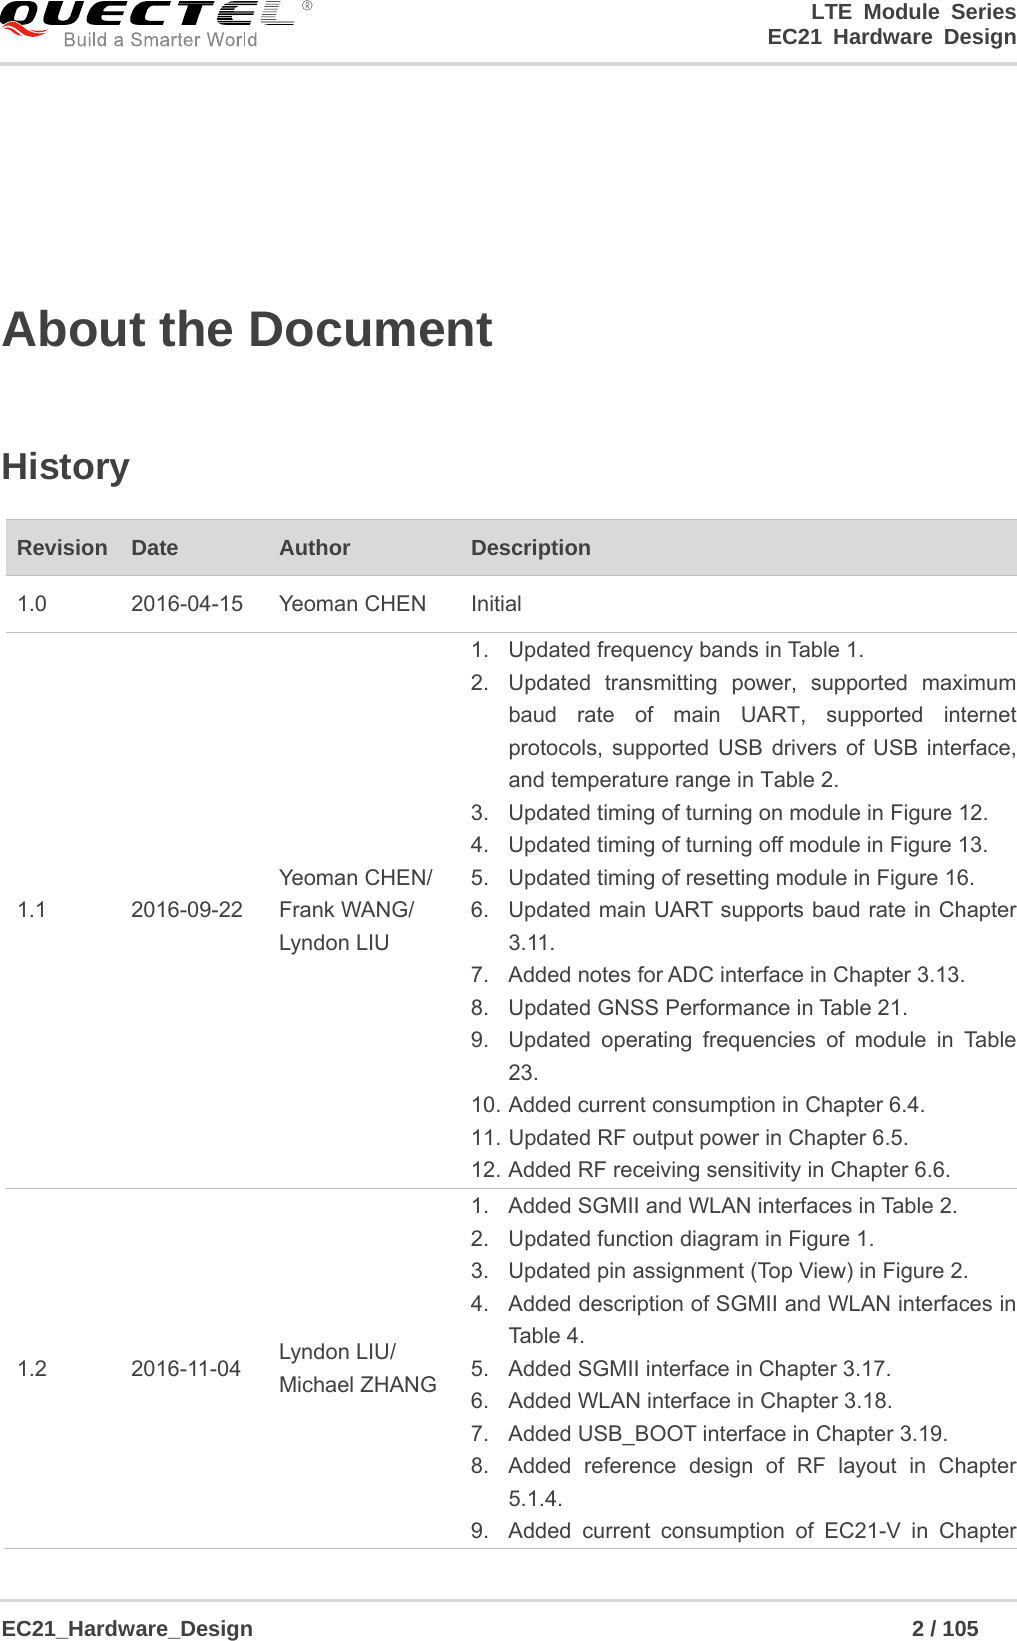                                                                        LTE Module Series                                                                 EC21 Hardware Design  EC21_Hardware_Design                                                            2 / 105    About the Document  History  Revision  Date  Author  Description 1.0 2016-04-15 Yeoman CHEN Initial 1.1 2016-09-22 Yeoman CHEN/ Frank WANG/ Lyndon LIU 1.  Updated frequency bands in Table 1. 2.  Updated transmitting power, supported maximum baud rate of main UART, supported internet protocols, supported USB drivers of USB interface, and temperature range in Table 2. 3.  Updated timing of turning on module in Figure 12. 4.  Updated timing of turning off module in Figure 13. 5.  Updated timing of resetting module in Figure 16. 6.  Updated main UART supports baud rate in Chapter 3.11. 7.  Added notes for ADC interface in Chapter 3.13. 8.  Updated GNSS Performance in Table 21. 9.  Updated operating frequencies of module in Table 23. 10. Added current consumption in Chapter 6.4. 11. Updated RF output power in Chapter 6.5. 12. Added RF receiving sensitivity in Chapter 6.6. 1.2 2016-11-04 Lyndon LIU/ Michael ZHANG 1.  Added SGMII and WLAN interfaces in Table 2. 2.  Updated function diagram in Figure 1. 3.  Updated pin assignment (Top View) in Figure 2. 4.  Added description of SGMII and WLAN interfaces in Table 4. 5.  Added SGMII interface in Chapter 3.17. 6.  Added WLAN interface in Chapter 3.18. 7.  Added USB_BOOT interface in Chapter 3.19. 8.  Added reference design of RF layout in Chapter 5.1.4. 9.  Added current consumption of EC21-V in Chapter 